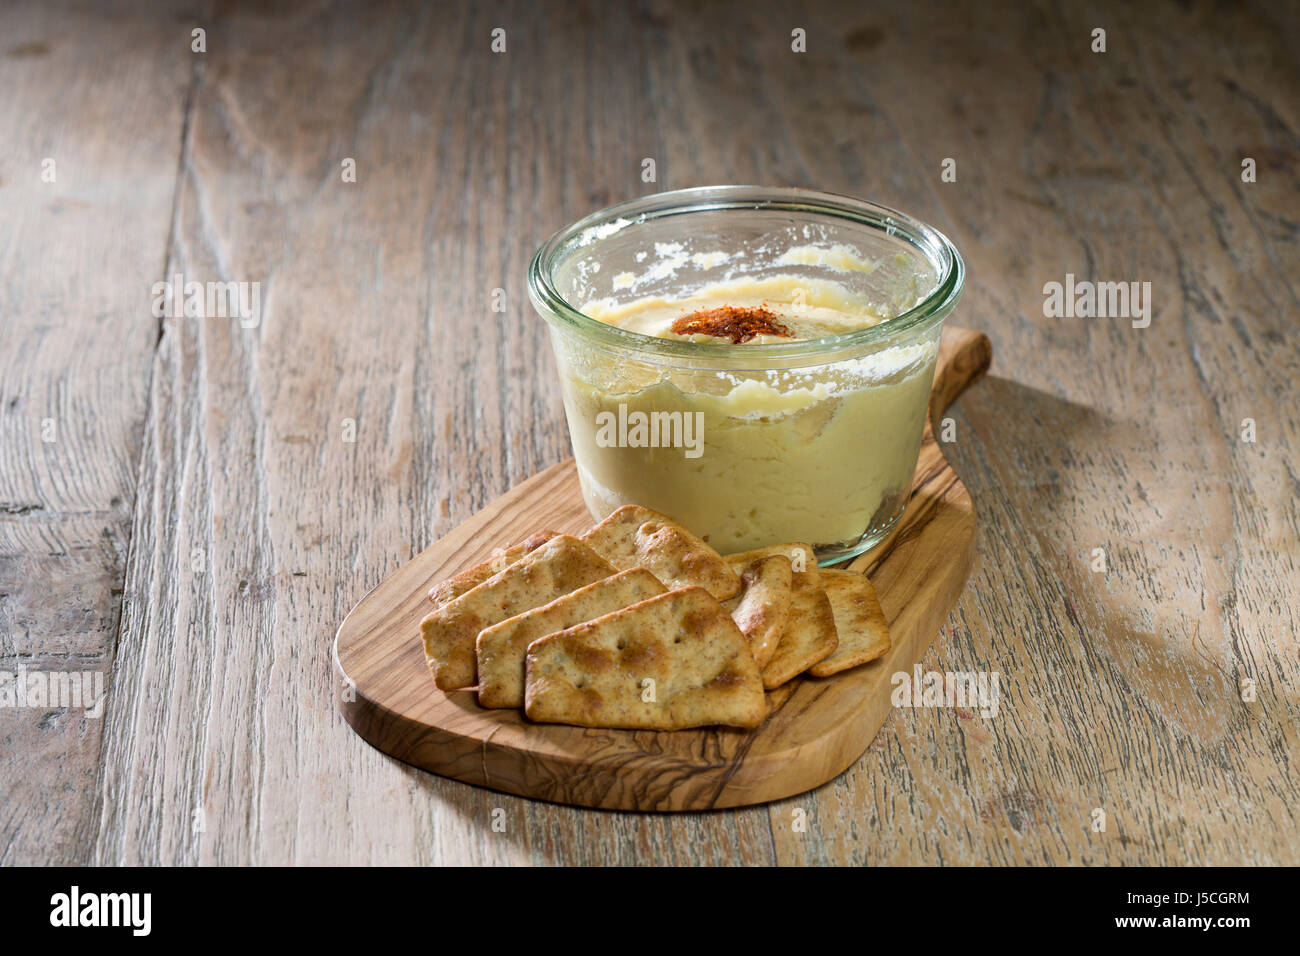 hummus or houmous middle eastern with Biscuits. Stock Photo